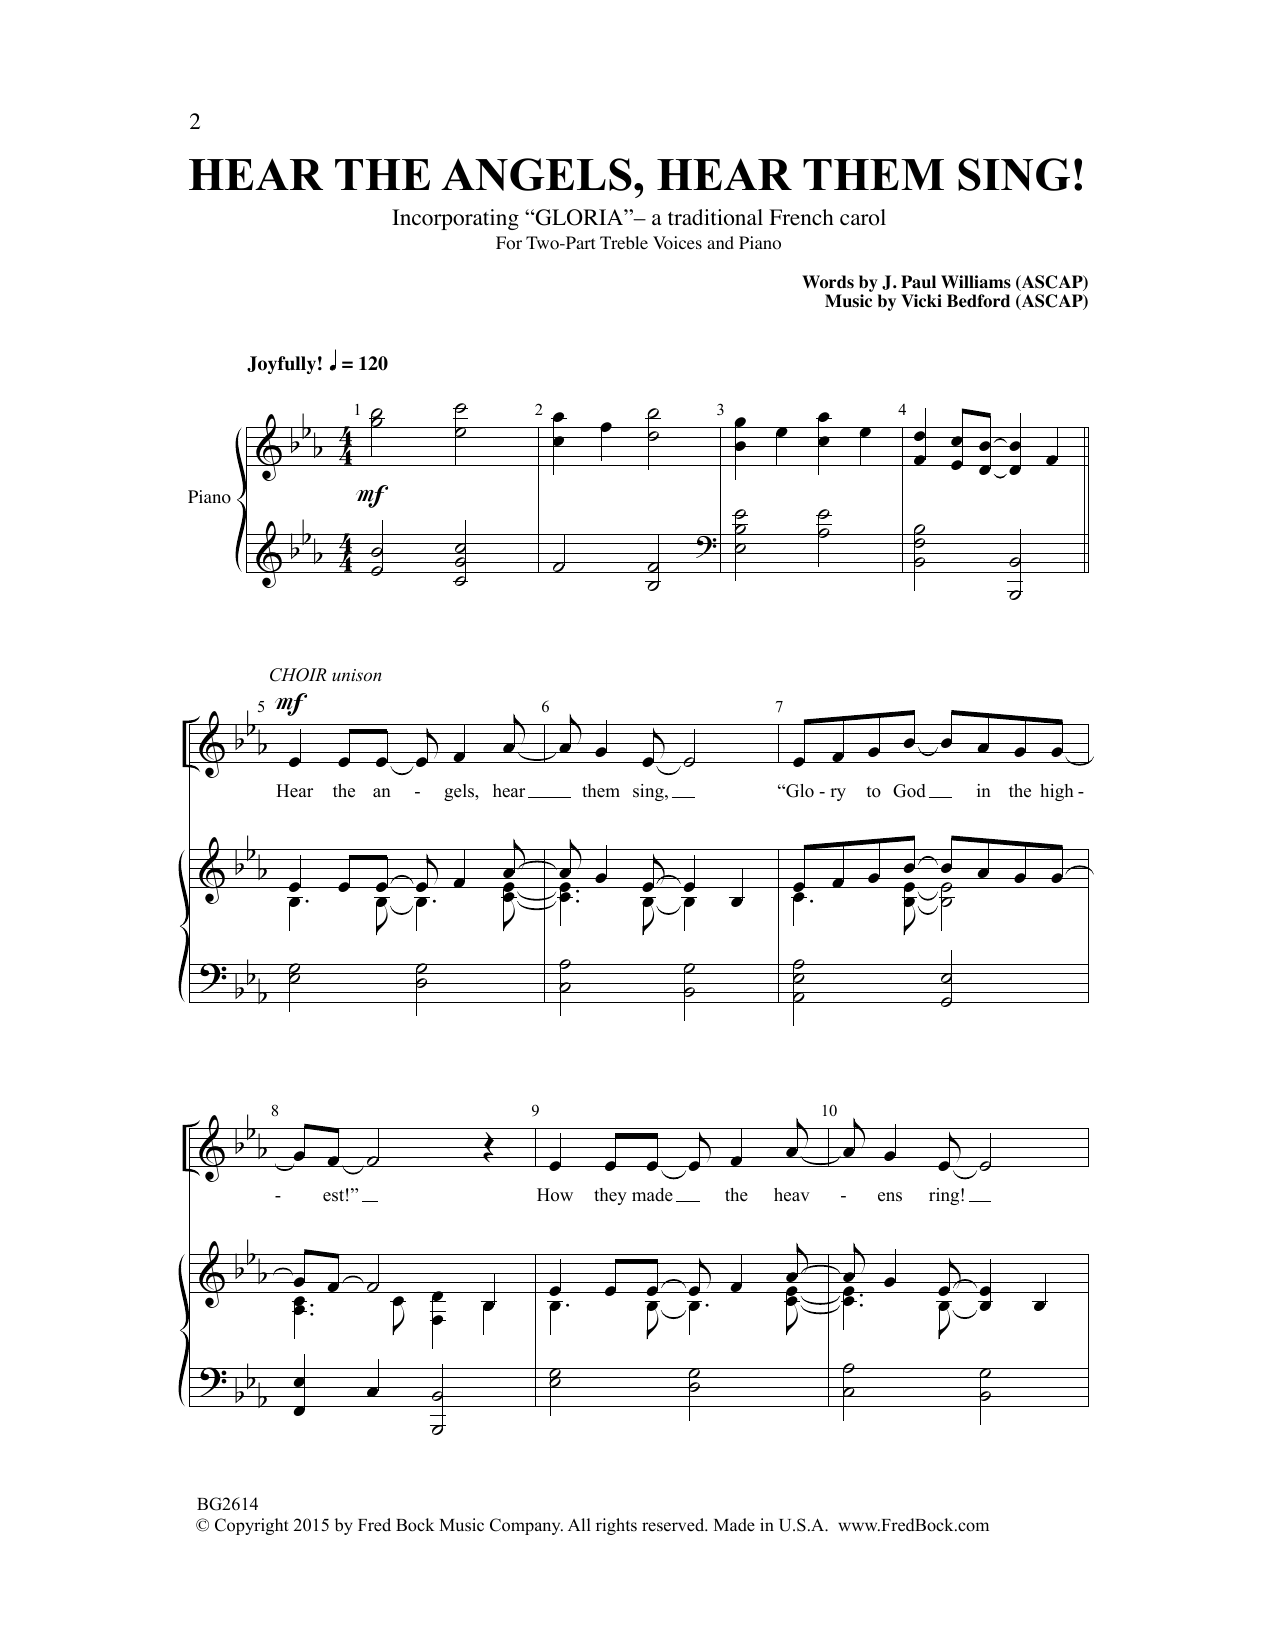 Download Vicki Bedford Hear The Angels, Hear Them Sing Sheet Music